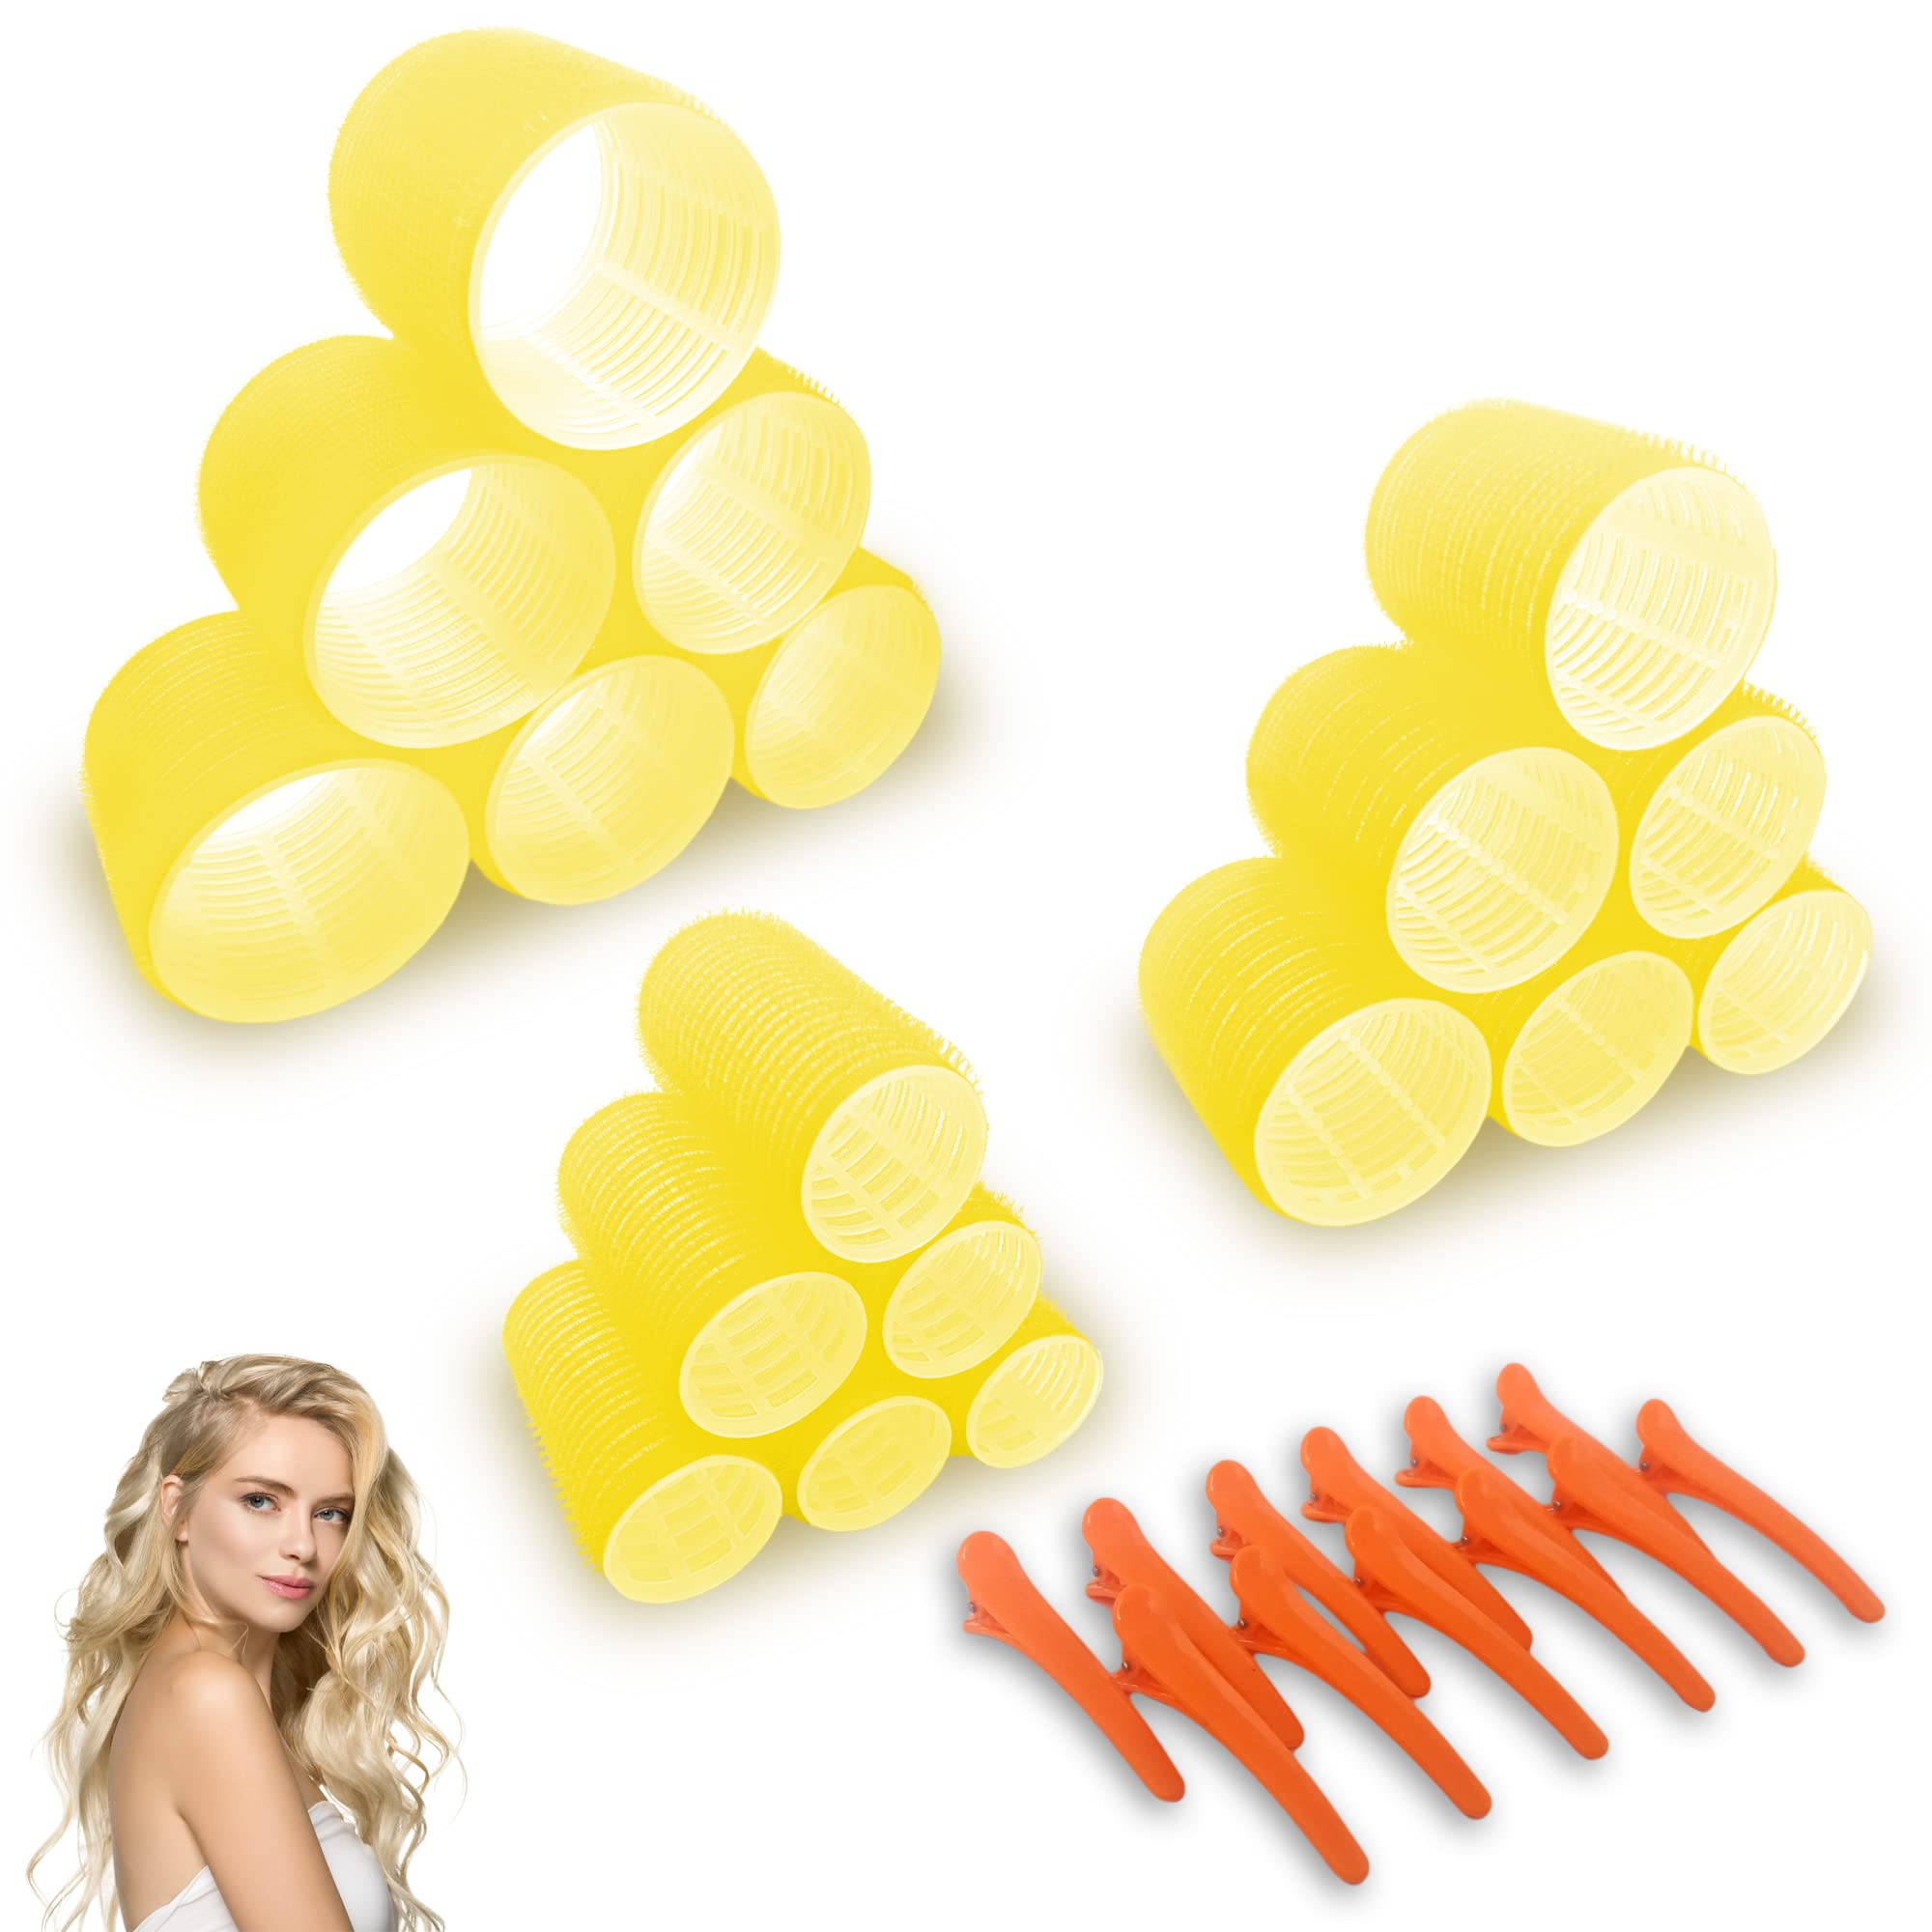 Large Hair Rollers with Clips - Self Grip Jumbo/Big Curlers Rollers for Hair Volume, 18 Pack, 3 Sizes (6 Pcs Each) with 12 Hair Roller Clips